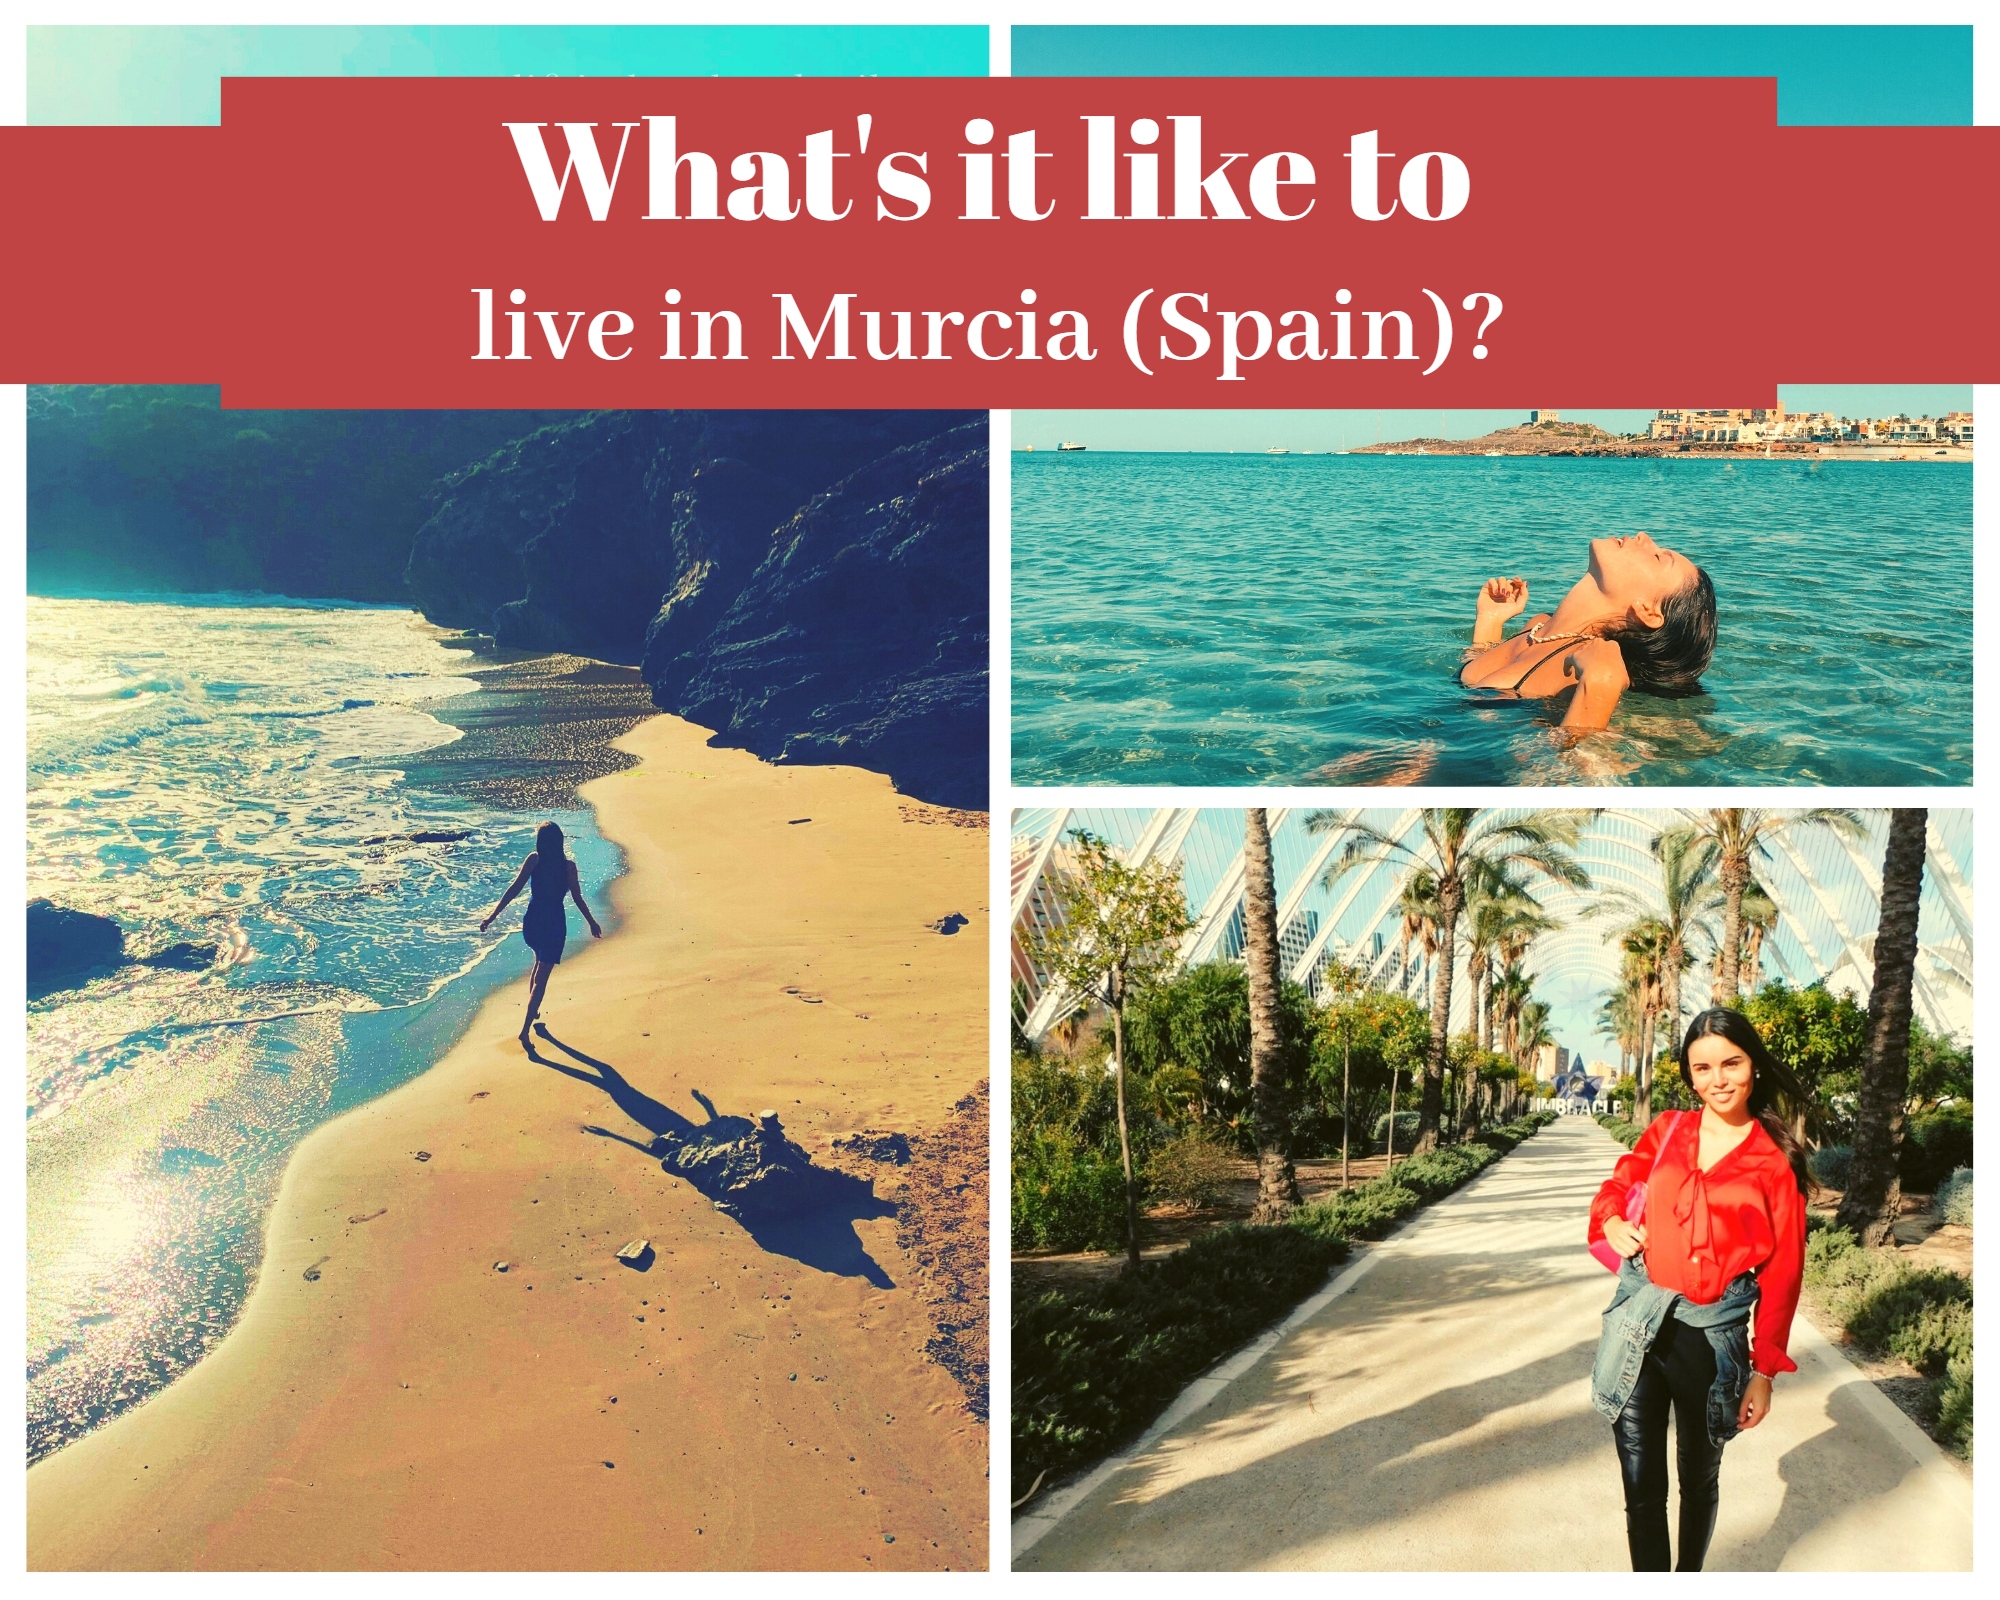 What’s it like to live in Murcia (Spain)?